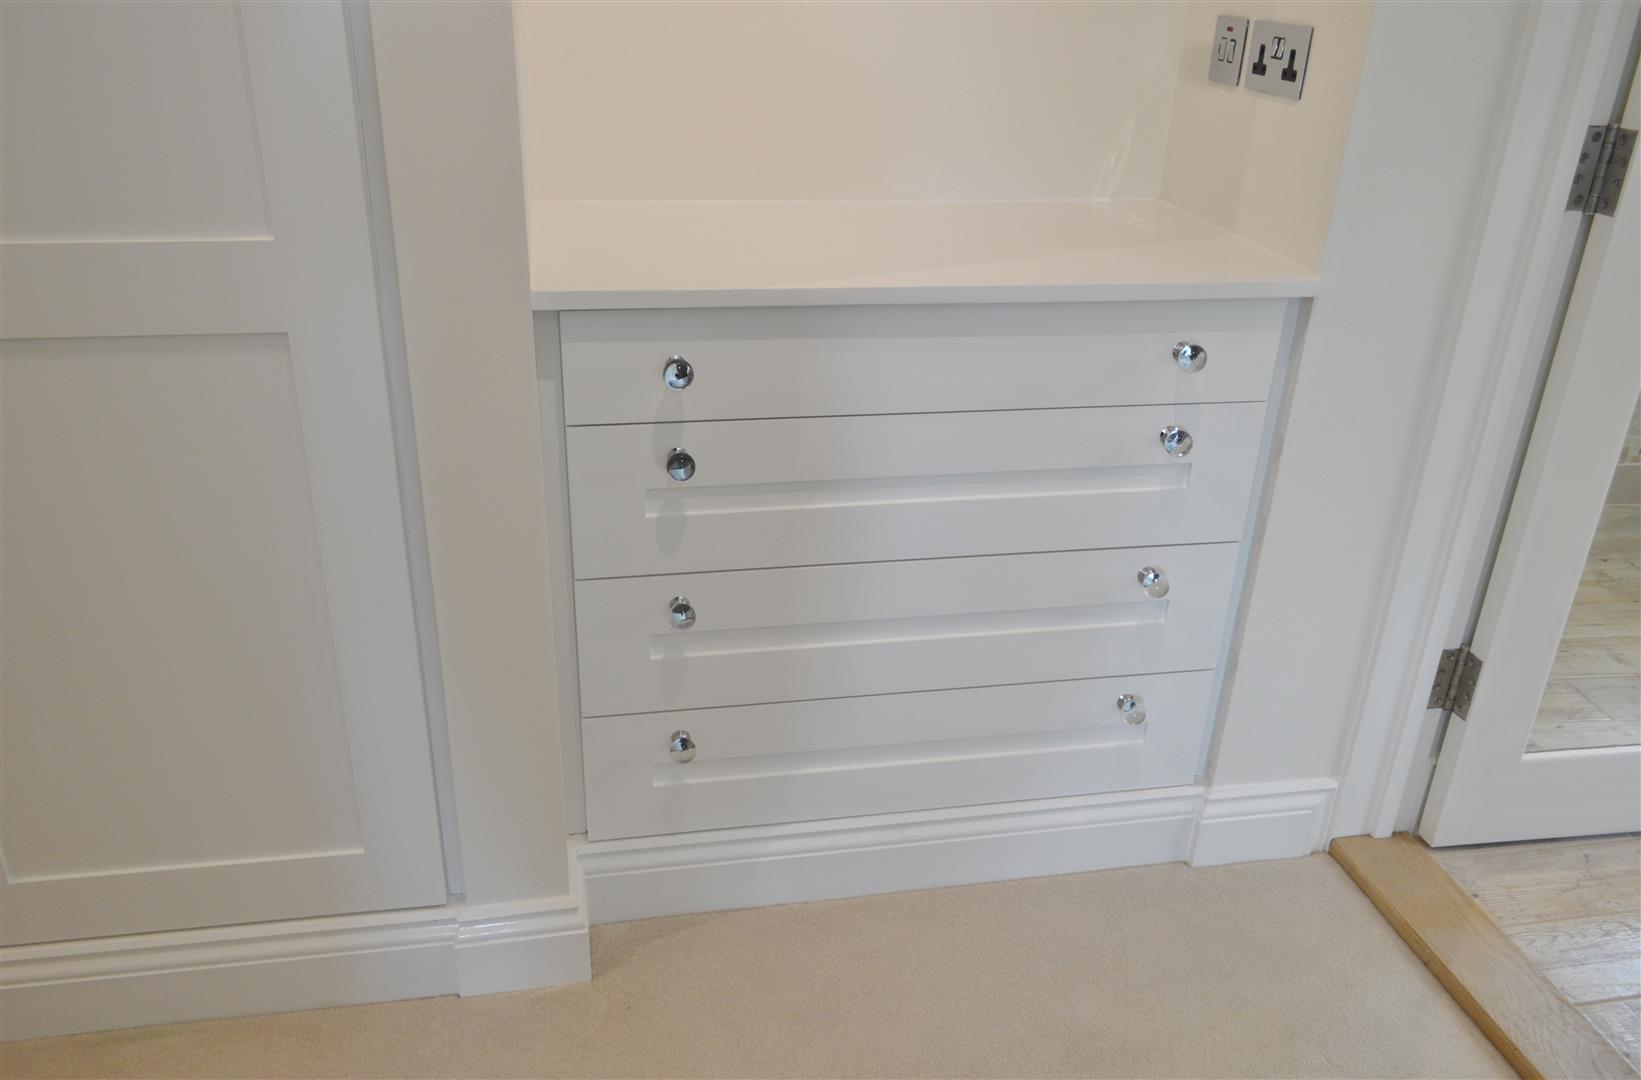 This set of drawers fills the alcove well to provide storage and worktop space. Incorporating the skirting into the design adds to its built-in effect.